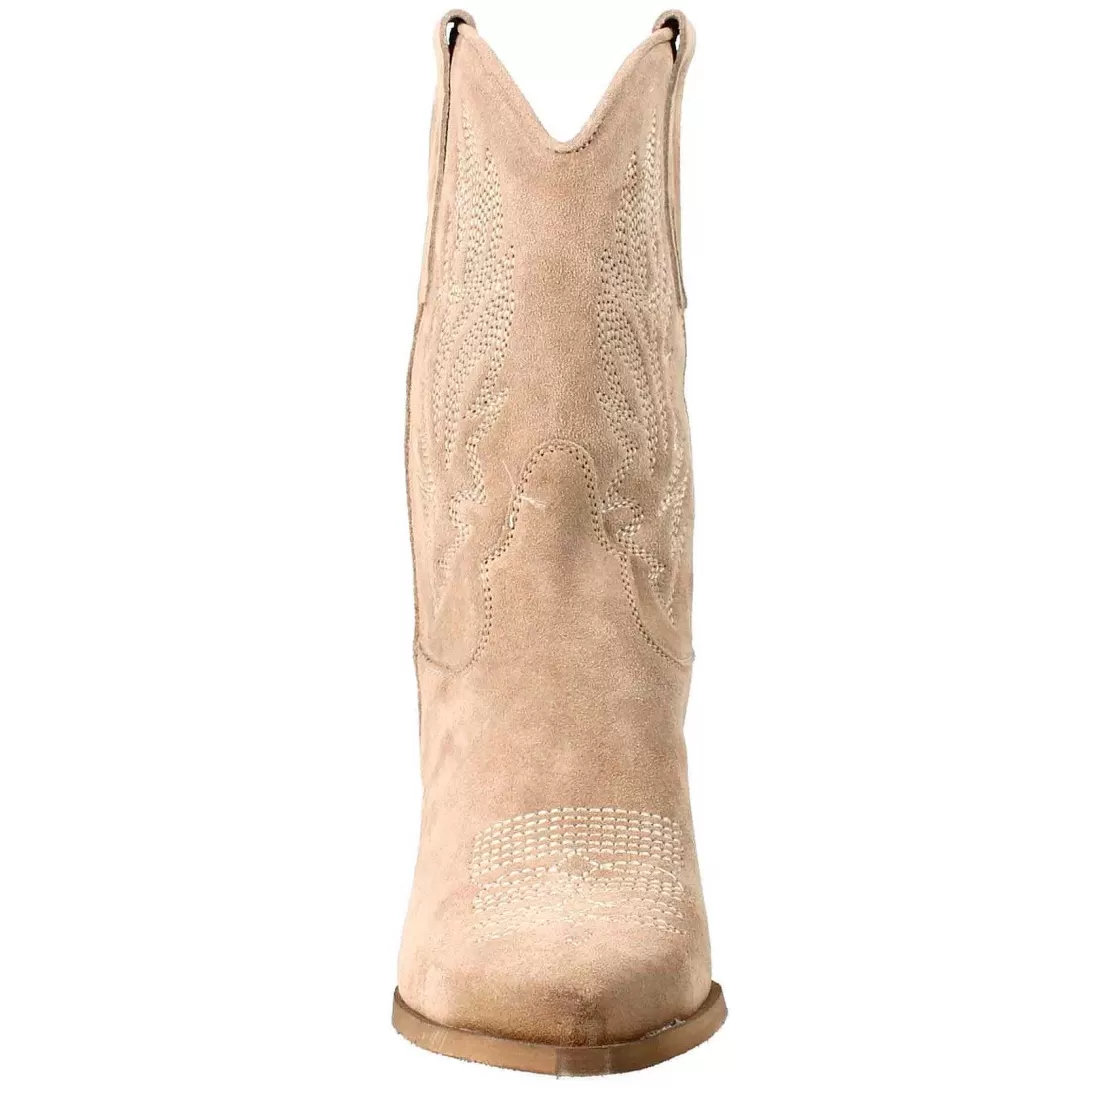 Leonardo Women'S Low Texan Boots In Beige Suede With Embroidery. Flash Sale